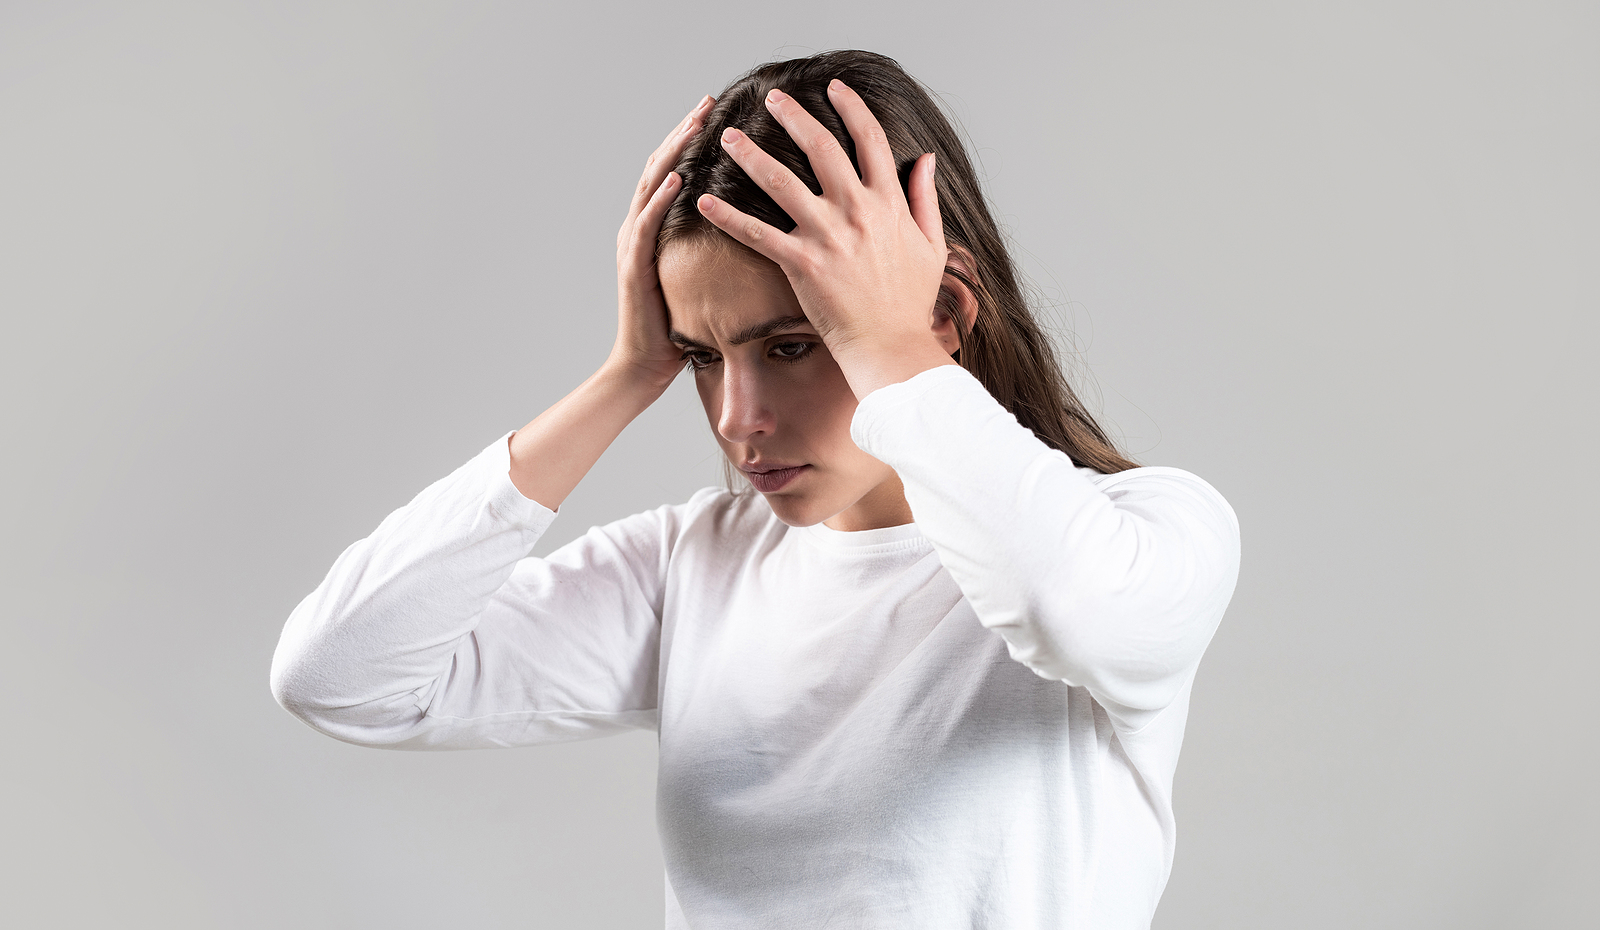 Brunette woman touching her temples feeling stress, on gray background representing dealing with ADHD. Are you struggling with the challenges that come with ADHD? Feeling stuck and overwhelmed? ADHD focused therapy in NYC can give you the tools to move forward successfully by embracing your ADHD.